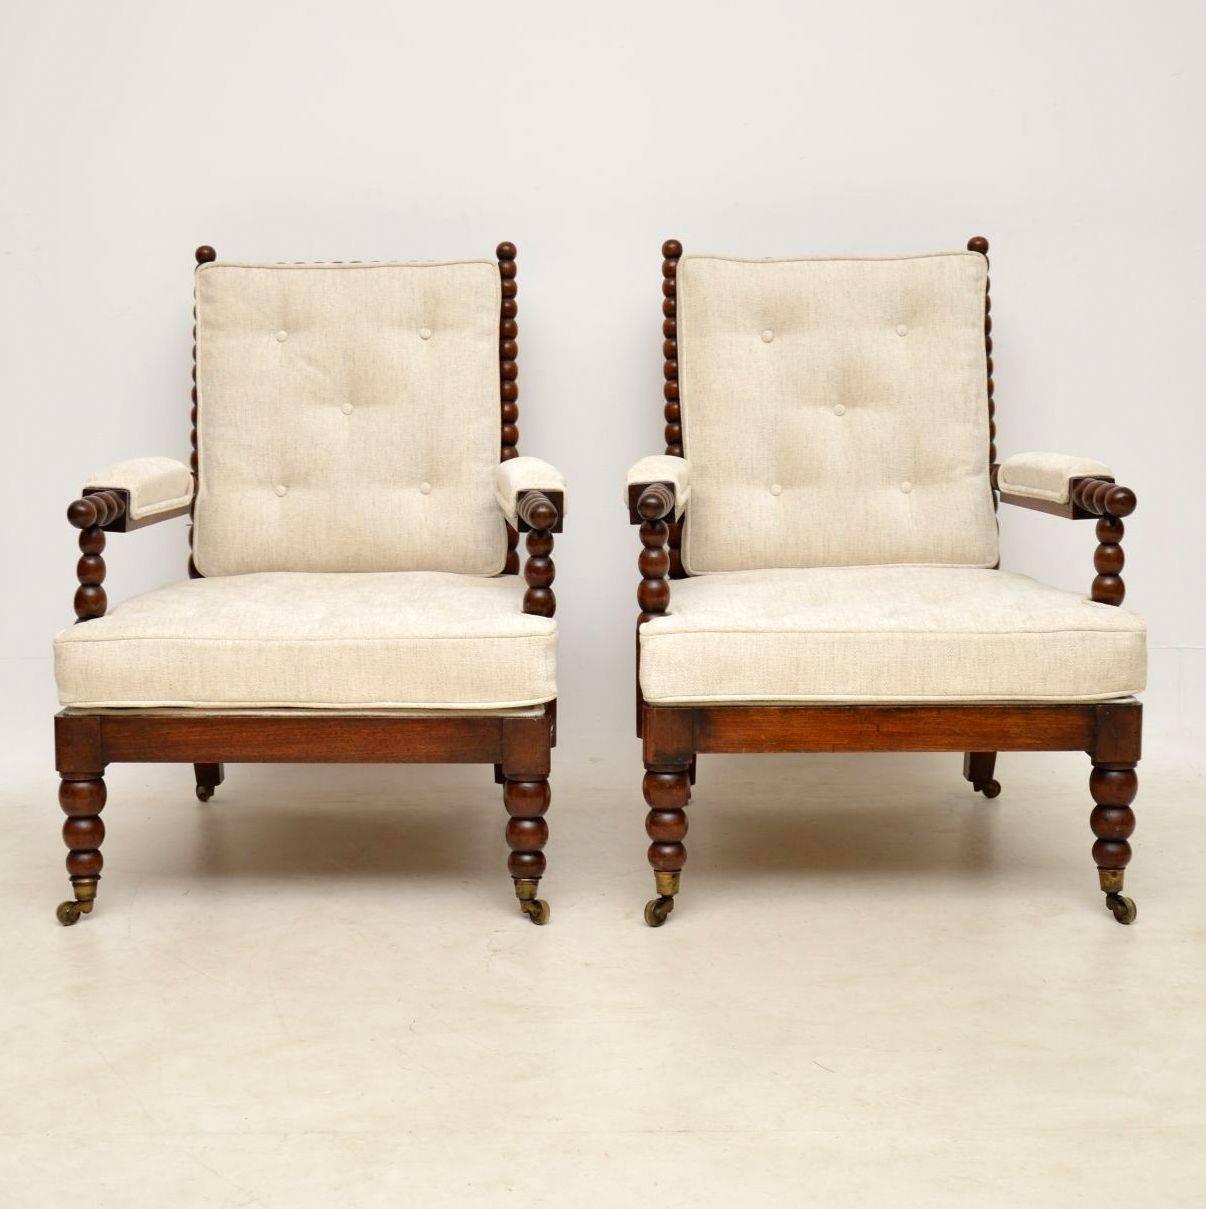 Pair of antique William IV mahogany turned bobbin framed armchairs. The frames are in excellent original condition, sturdy and full of character. The turned bobbin legs sit on original brass capped casters. The cushions are original to the chairs